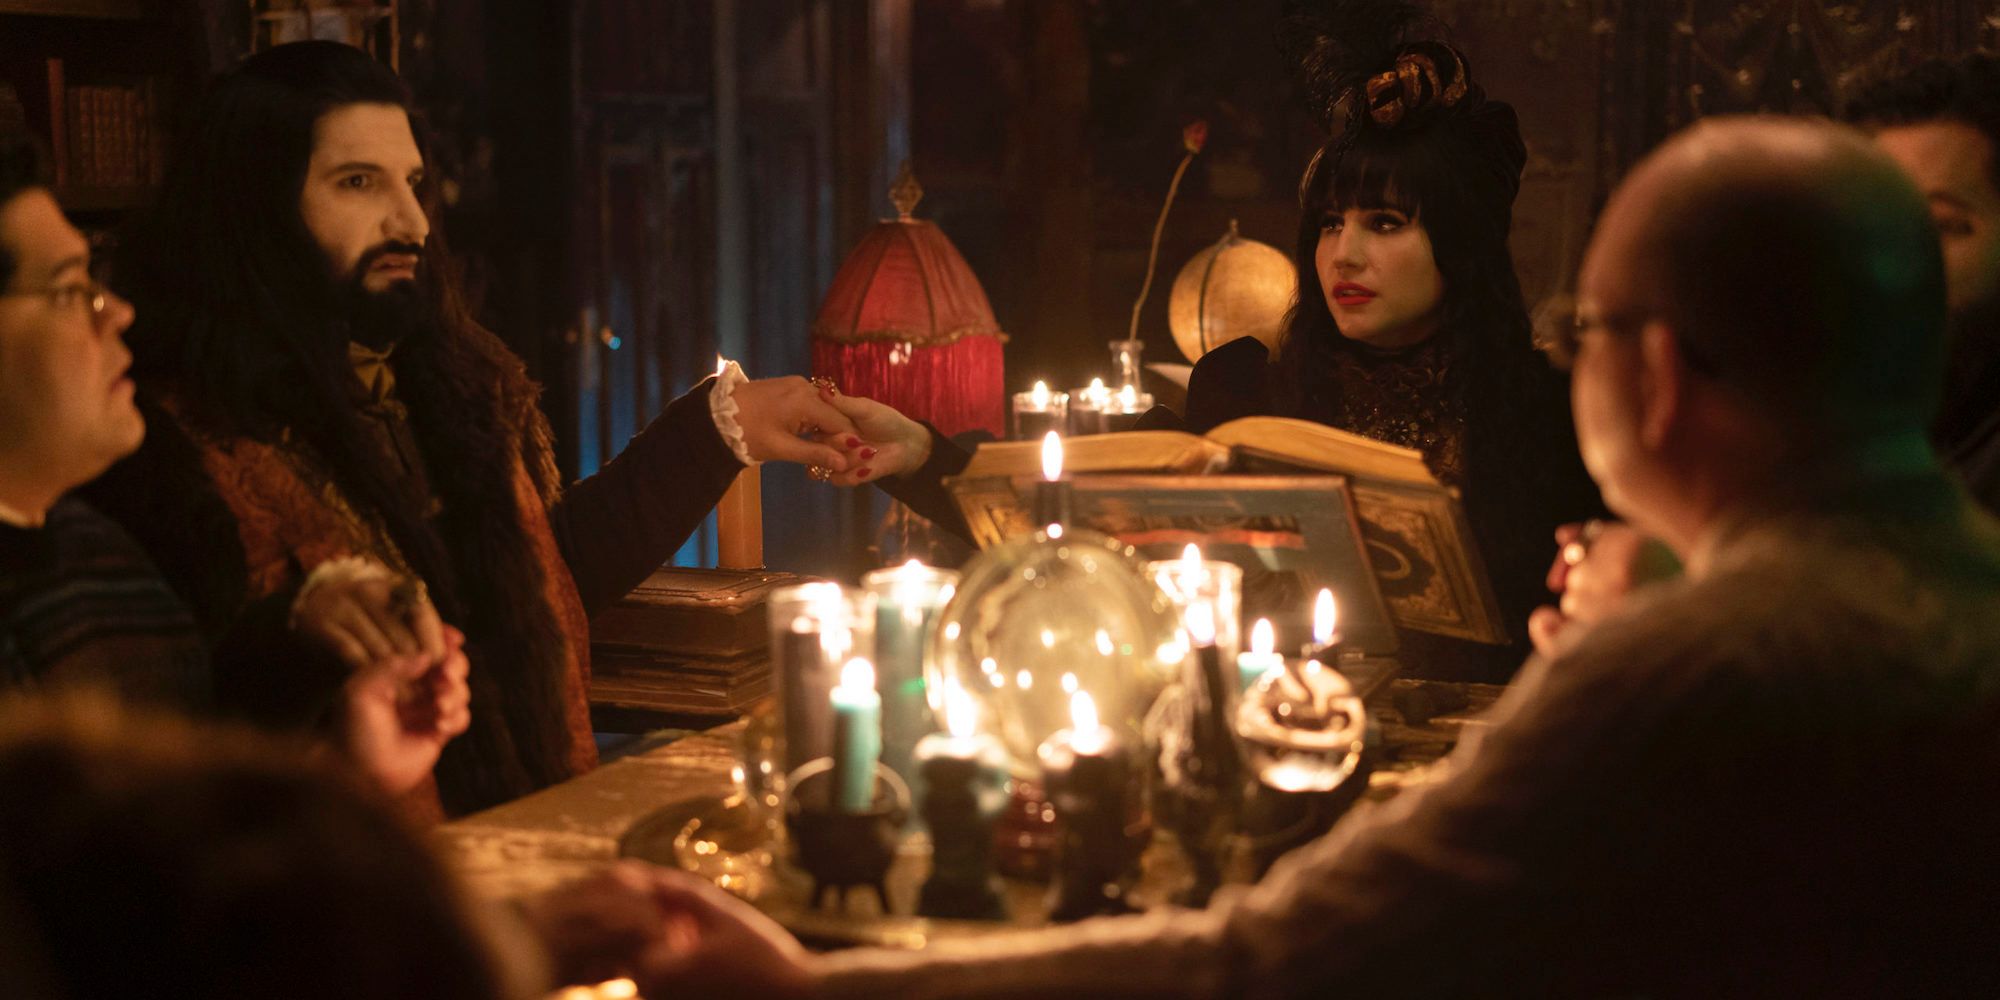 What We Do in the Shadows seance